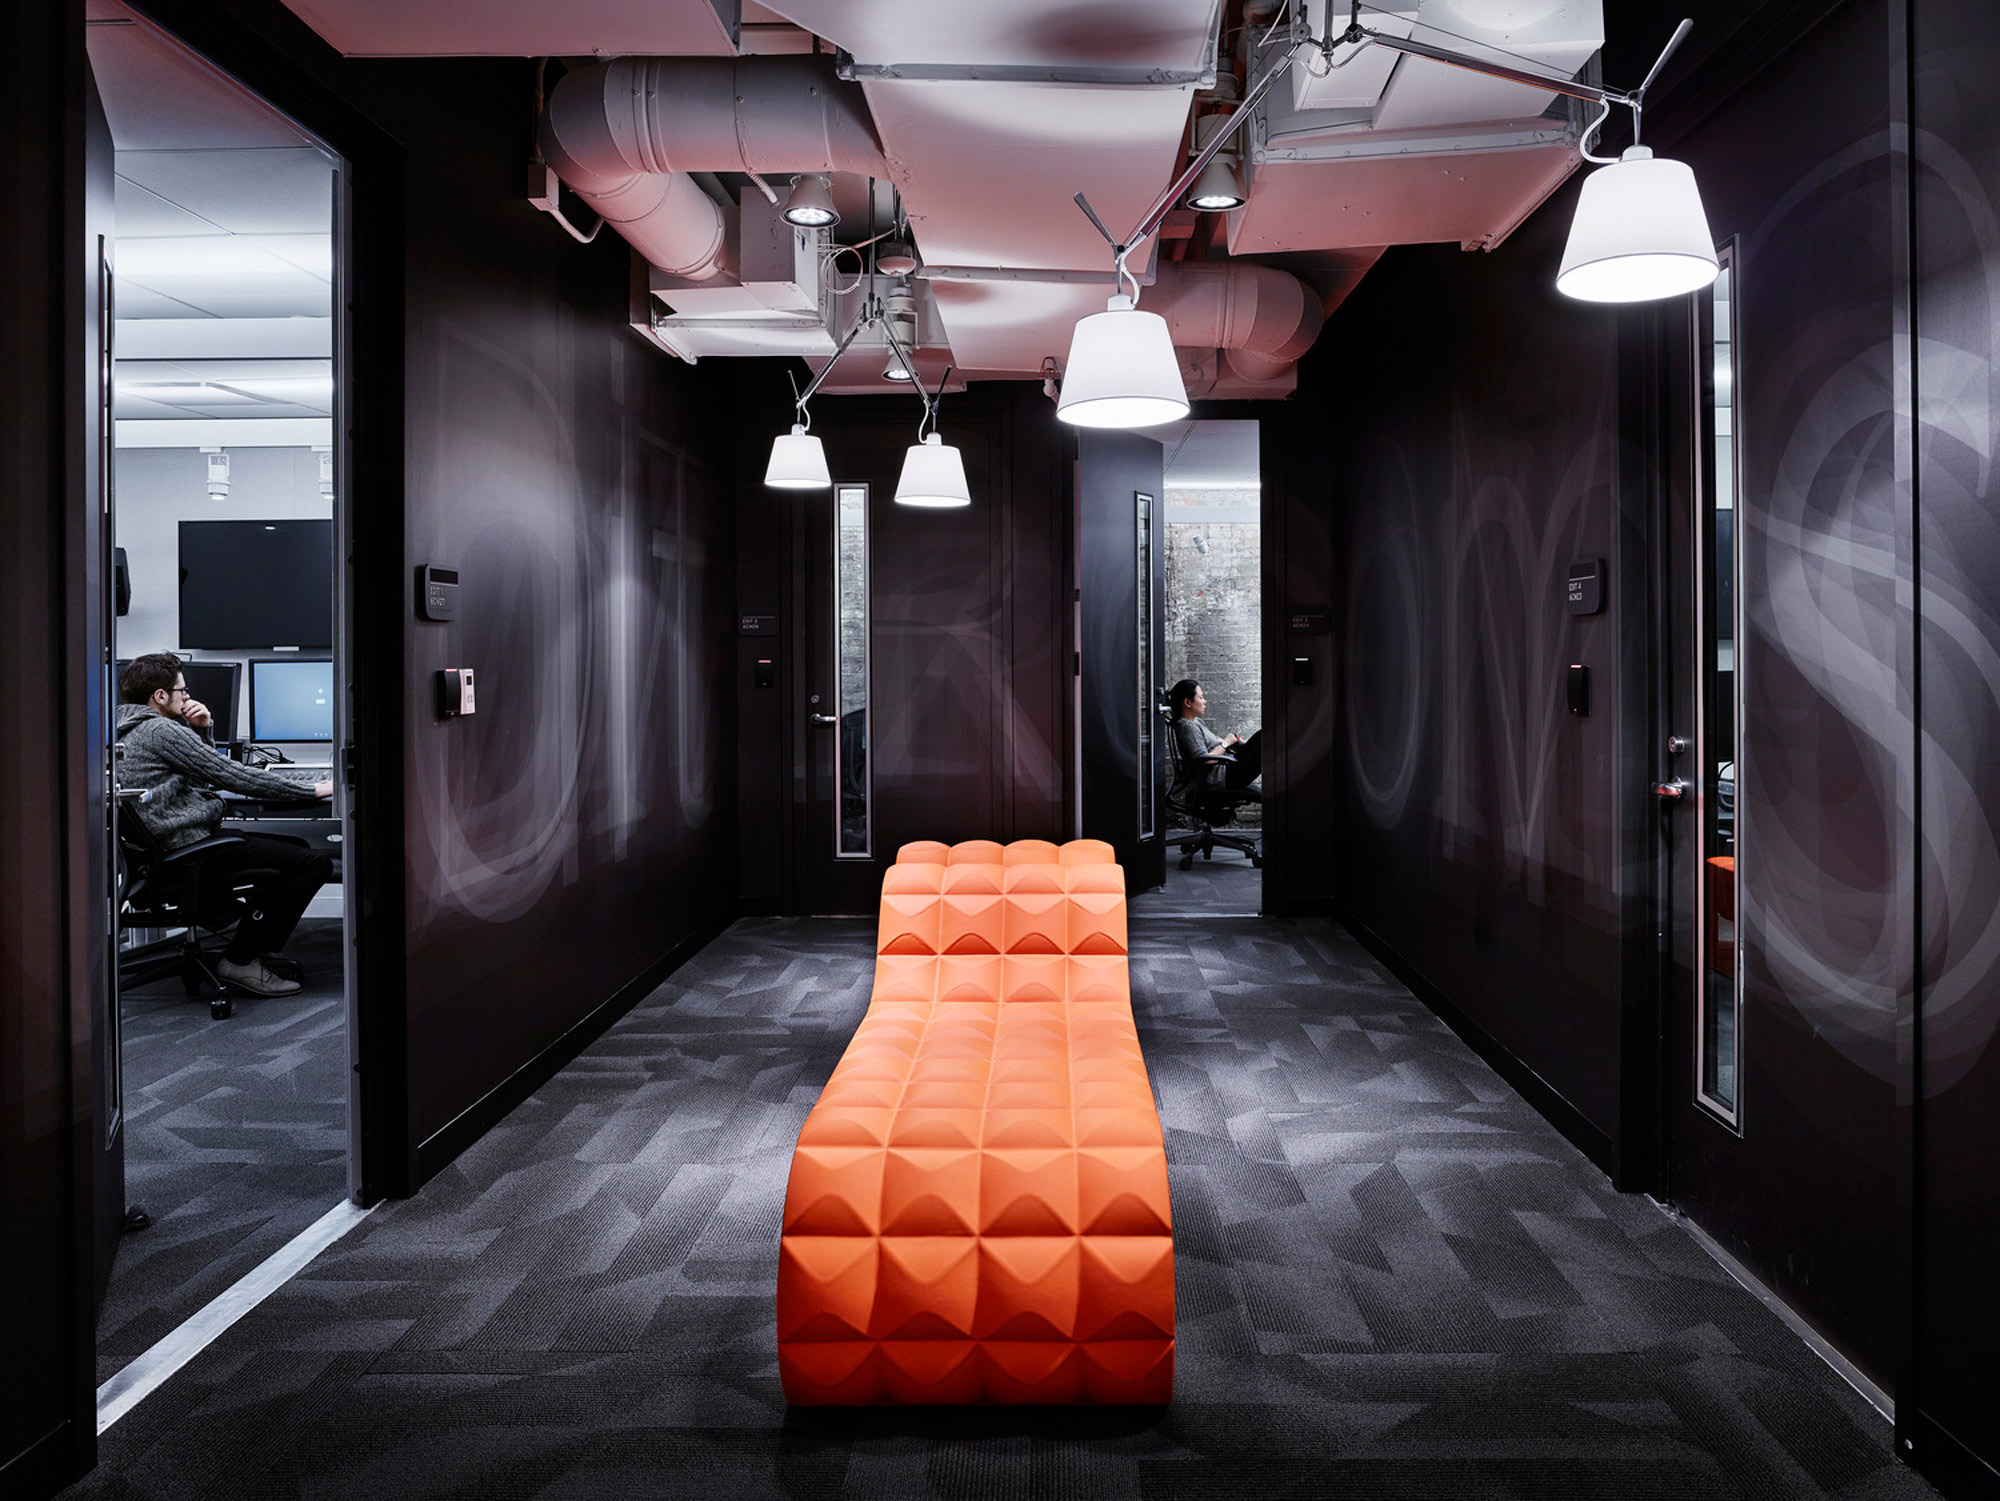 Sleek, modern office hallway featuring geometric patterned carpet, vibrant orange bench with a textured design, contrasting against dark walls and exposed ceiling with angular lighting fixtures.